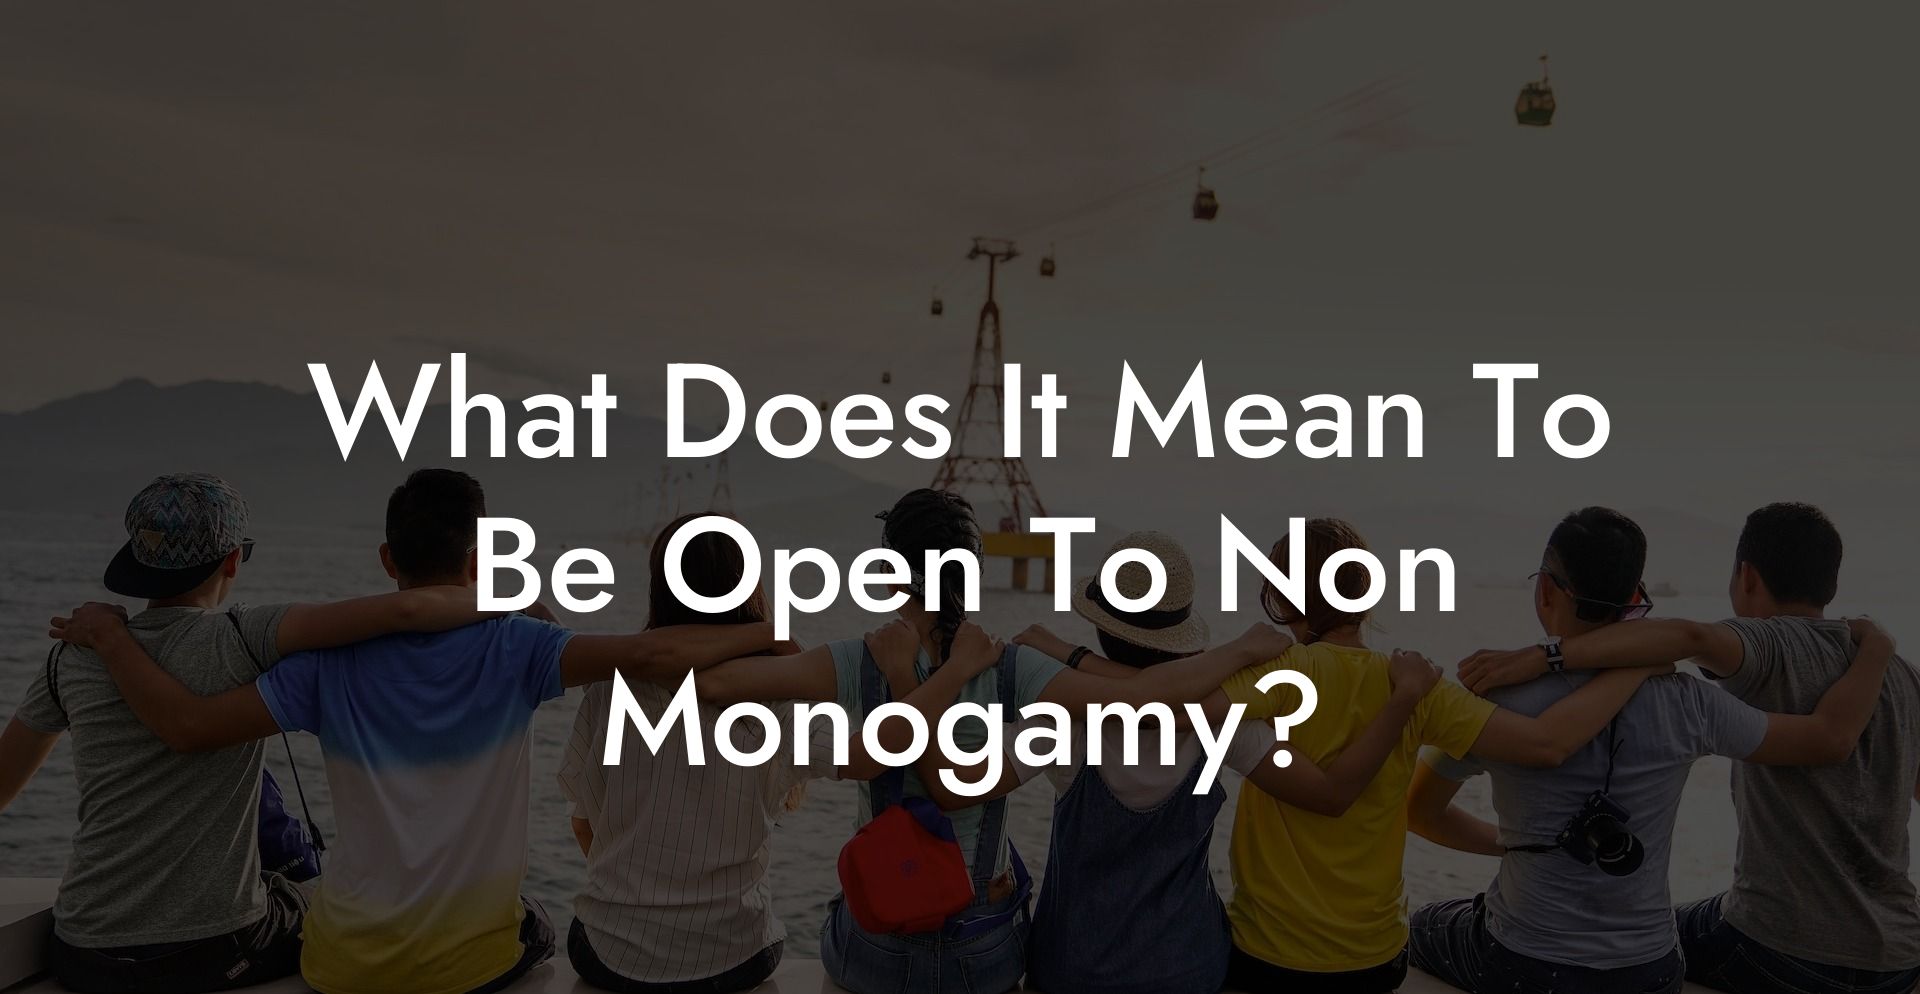 What Does It Mean To Be Open To Non Monogamy?